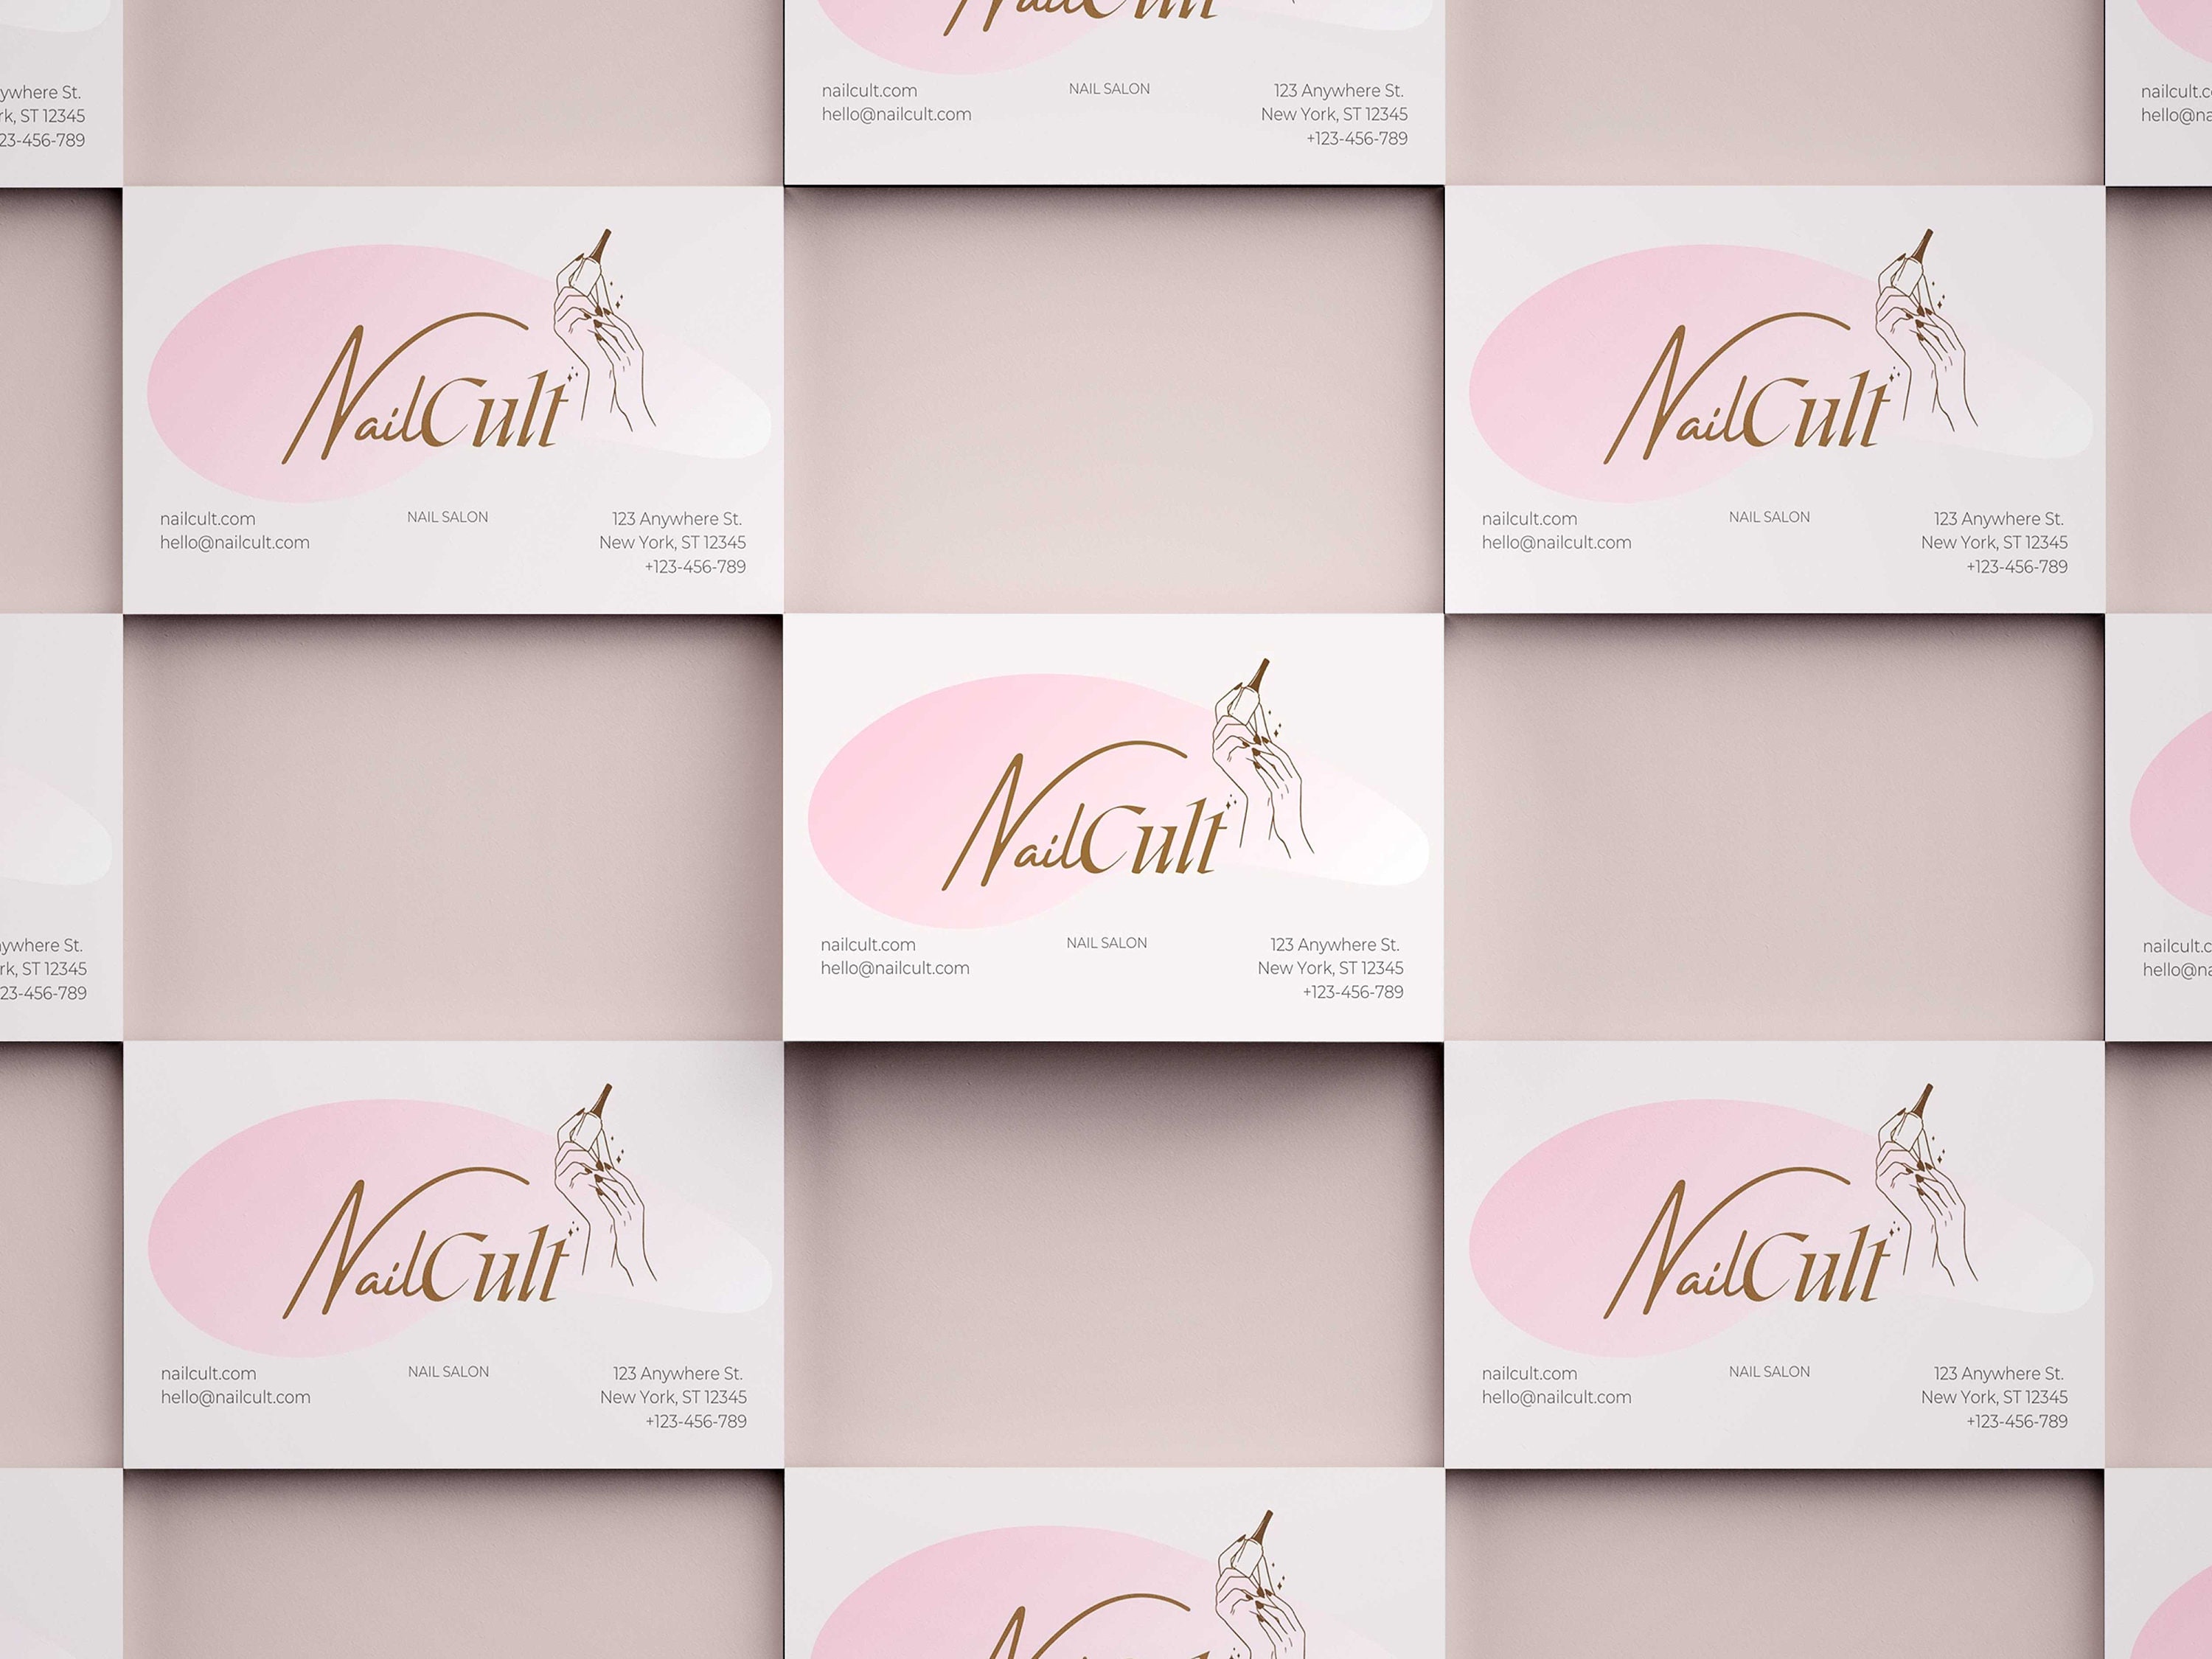 3. Free Nail Art Business Card Templates from Canva - wide 9